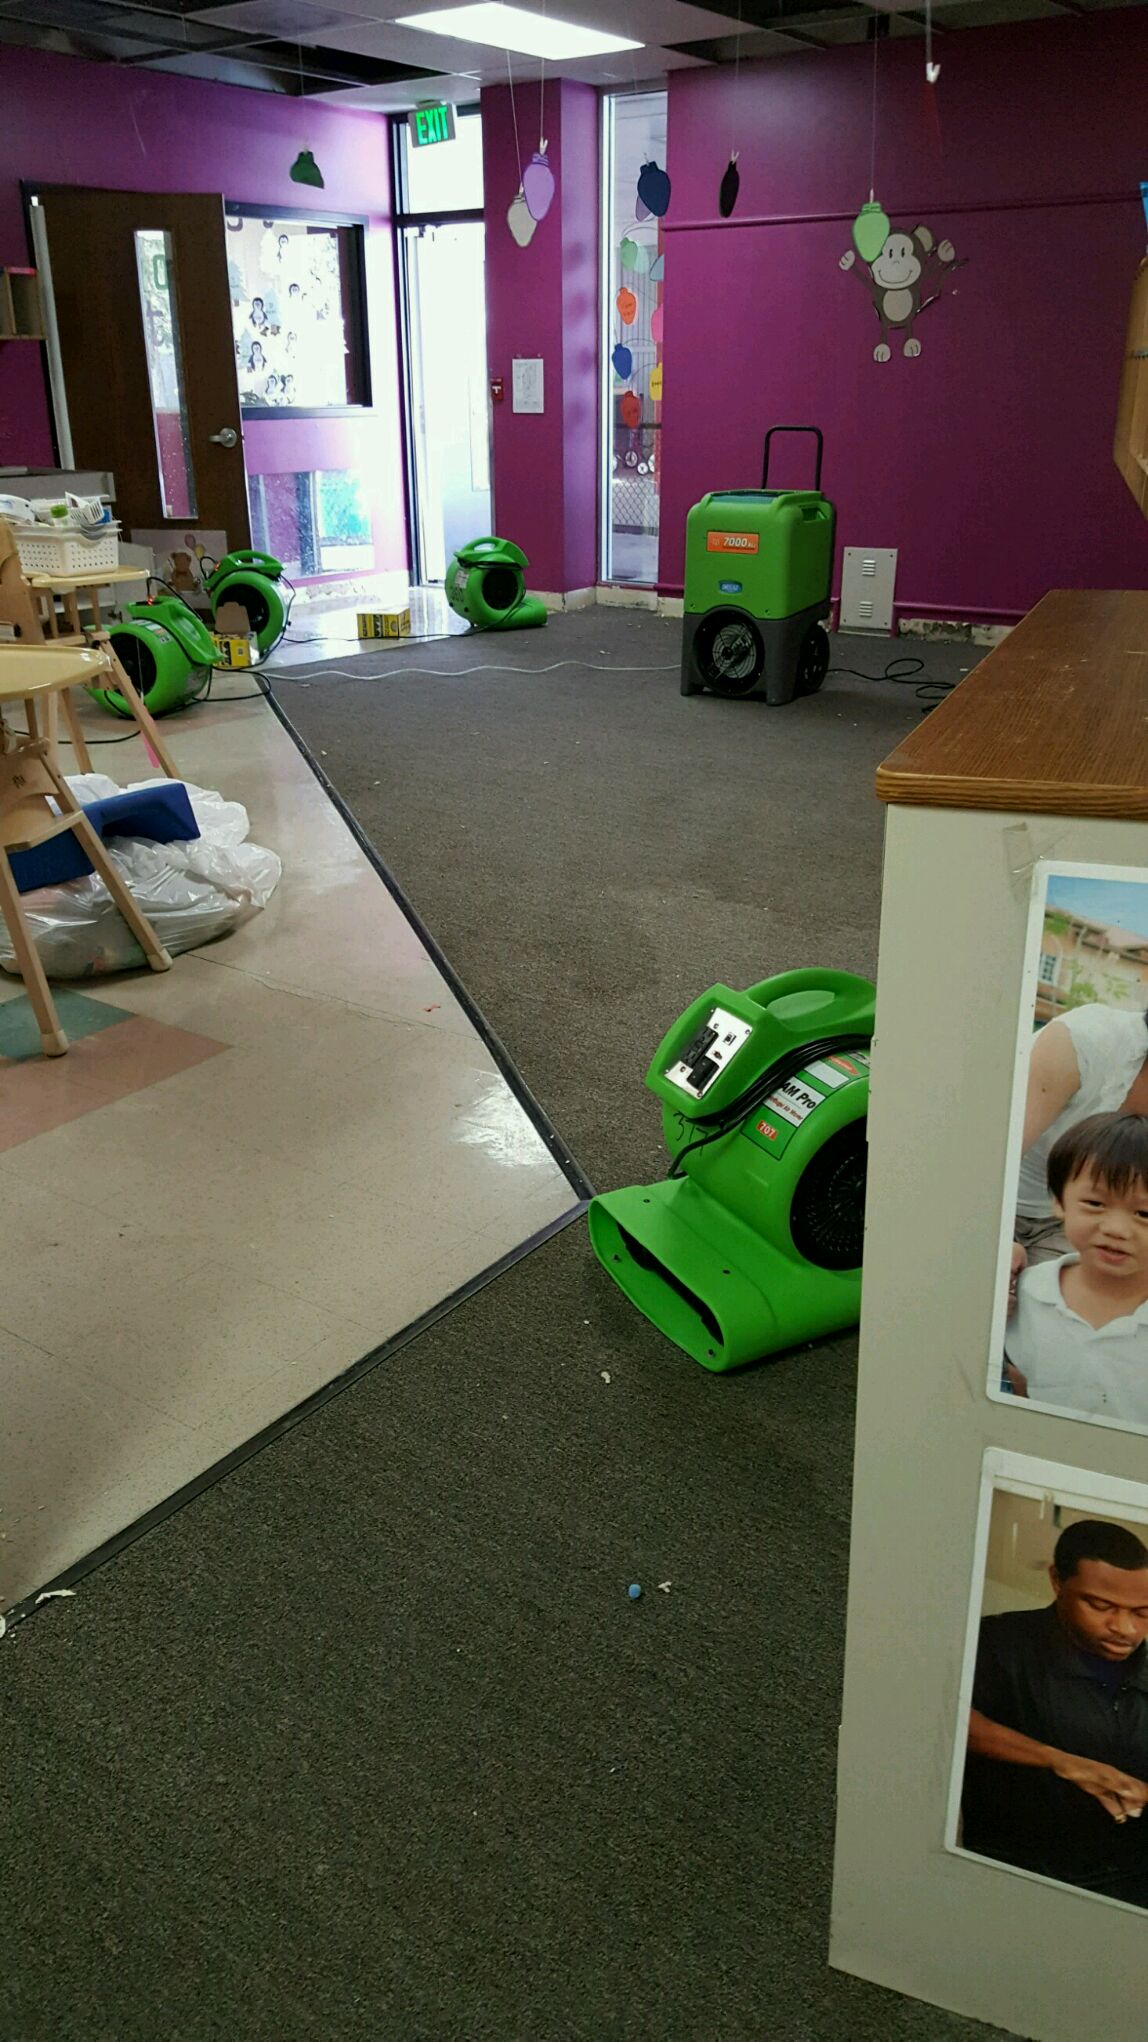 Water Damage Cleanup in a Daycare in Denver, Colorado. Our crew quickly extracted the water and dried the facility.